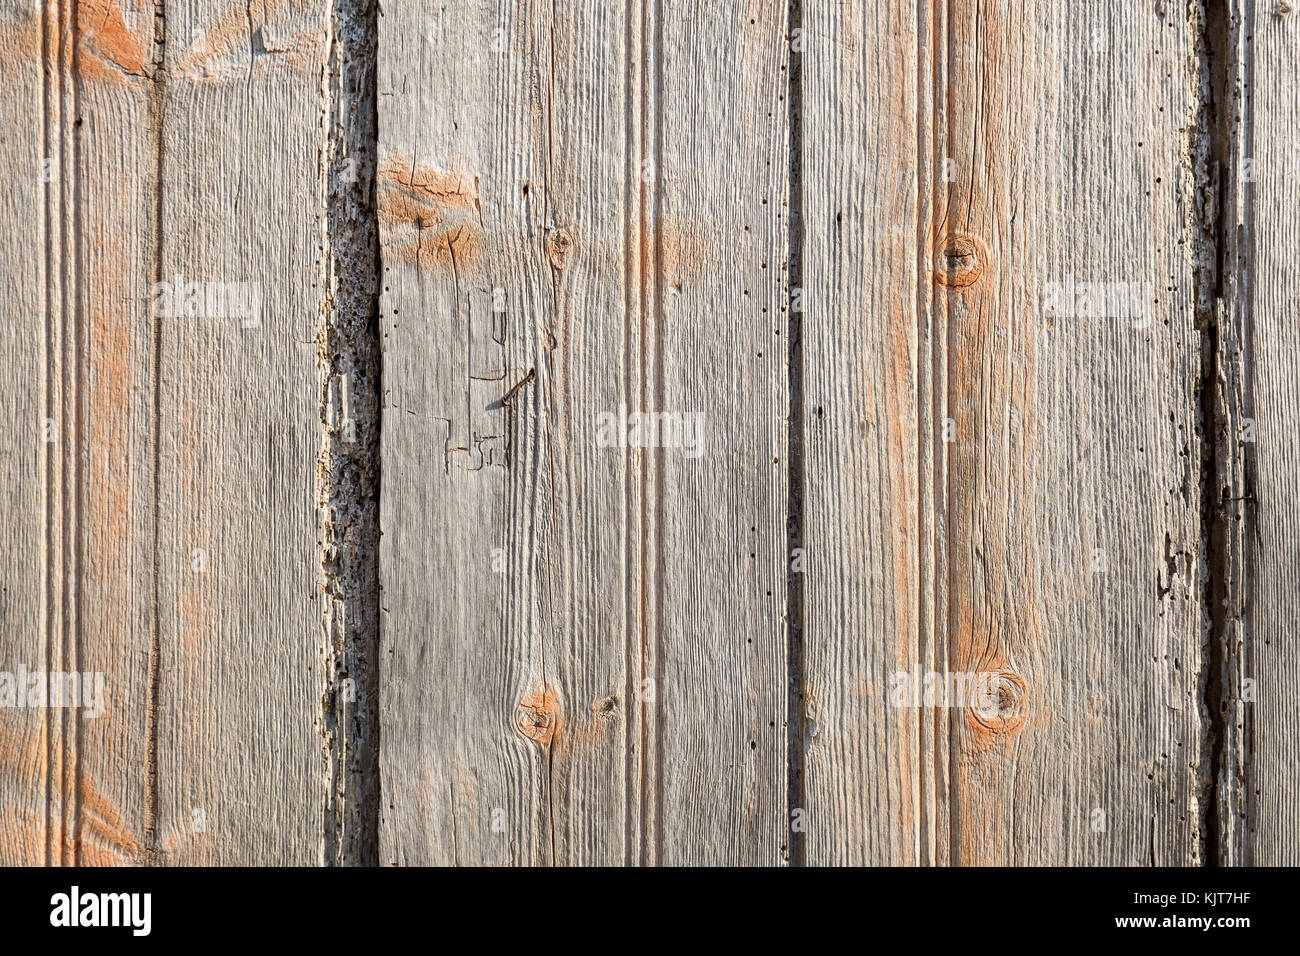 Vertical weathered old wooden planks Stock Photo